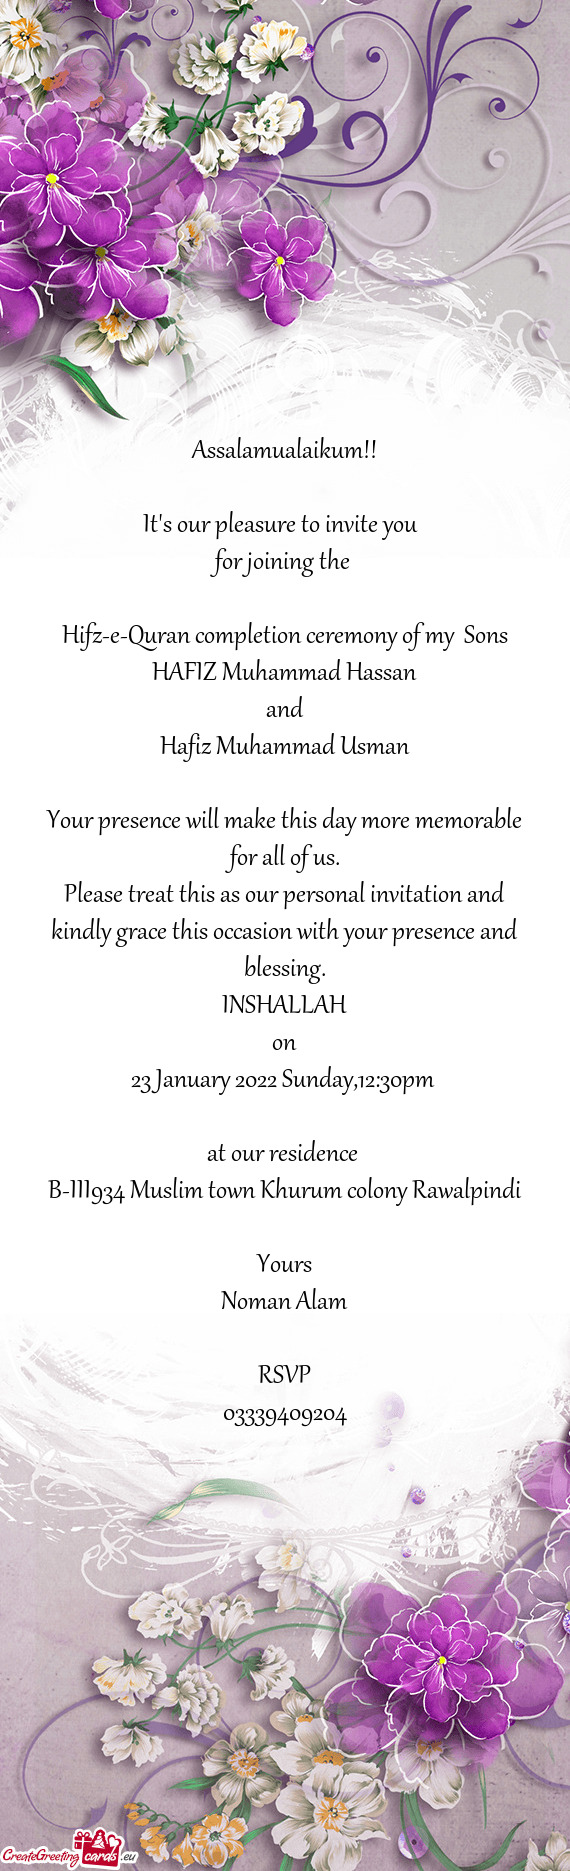 Hifz-e-Quran completion ceremony of my Sons